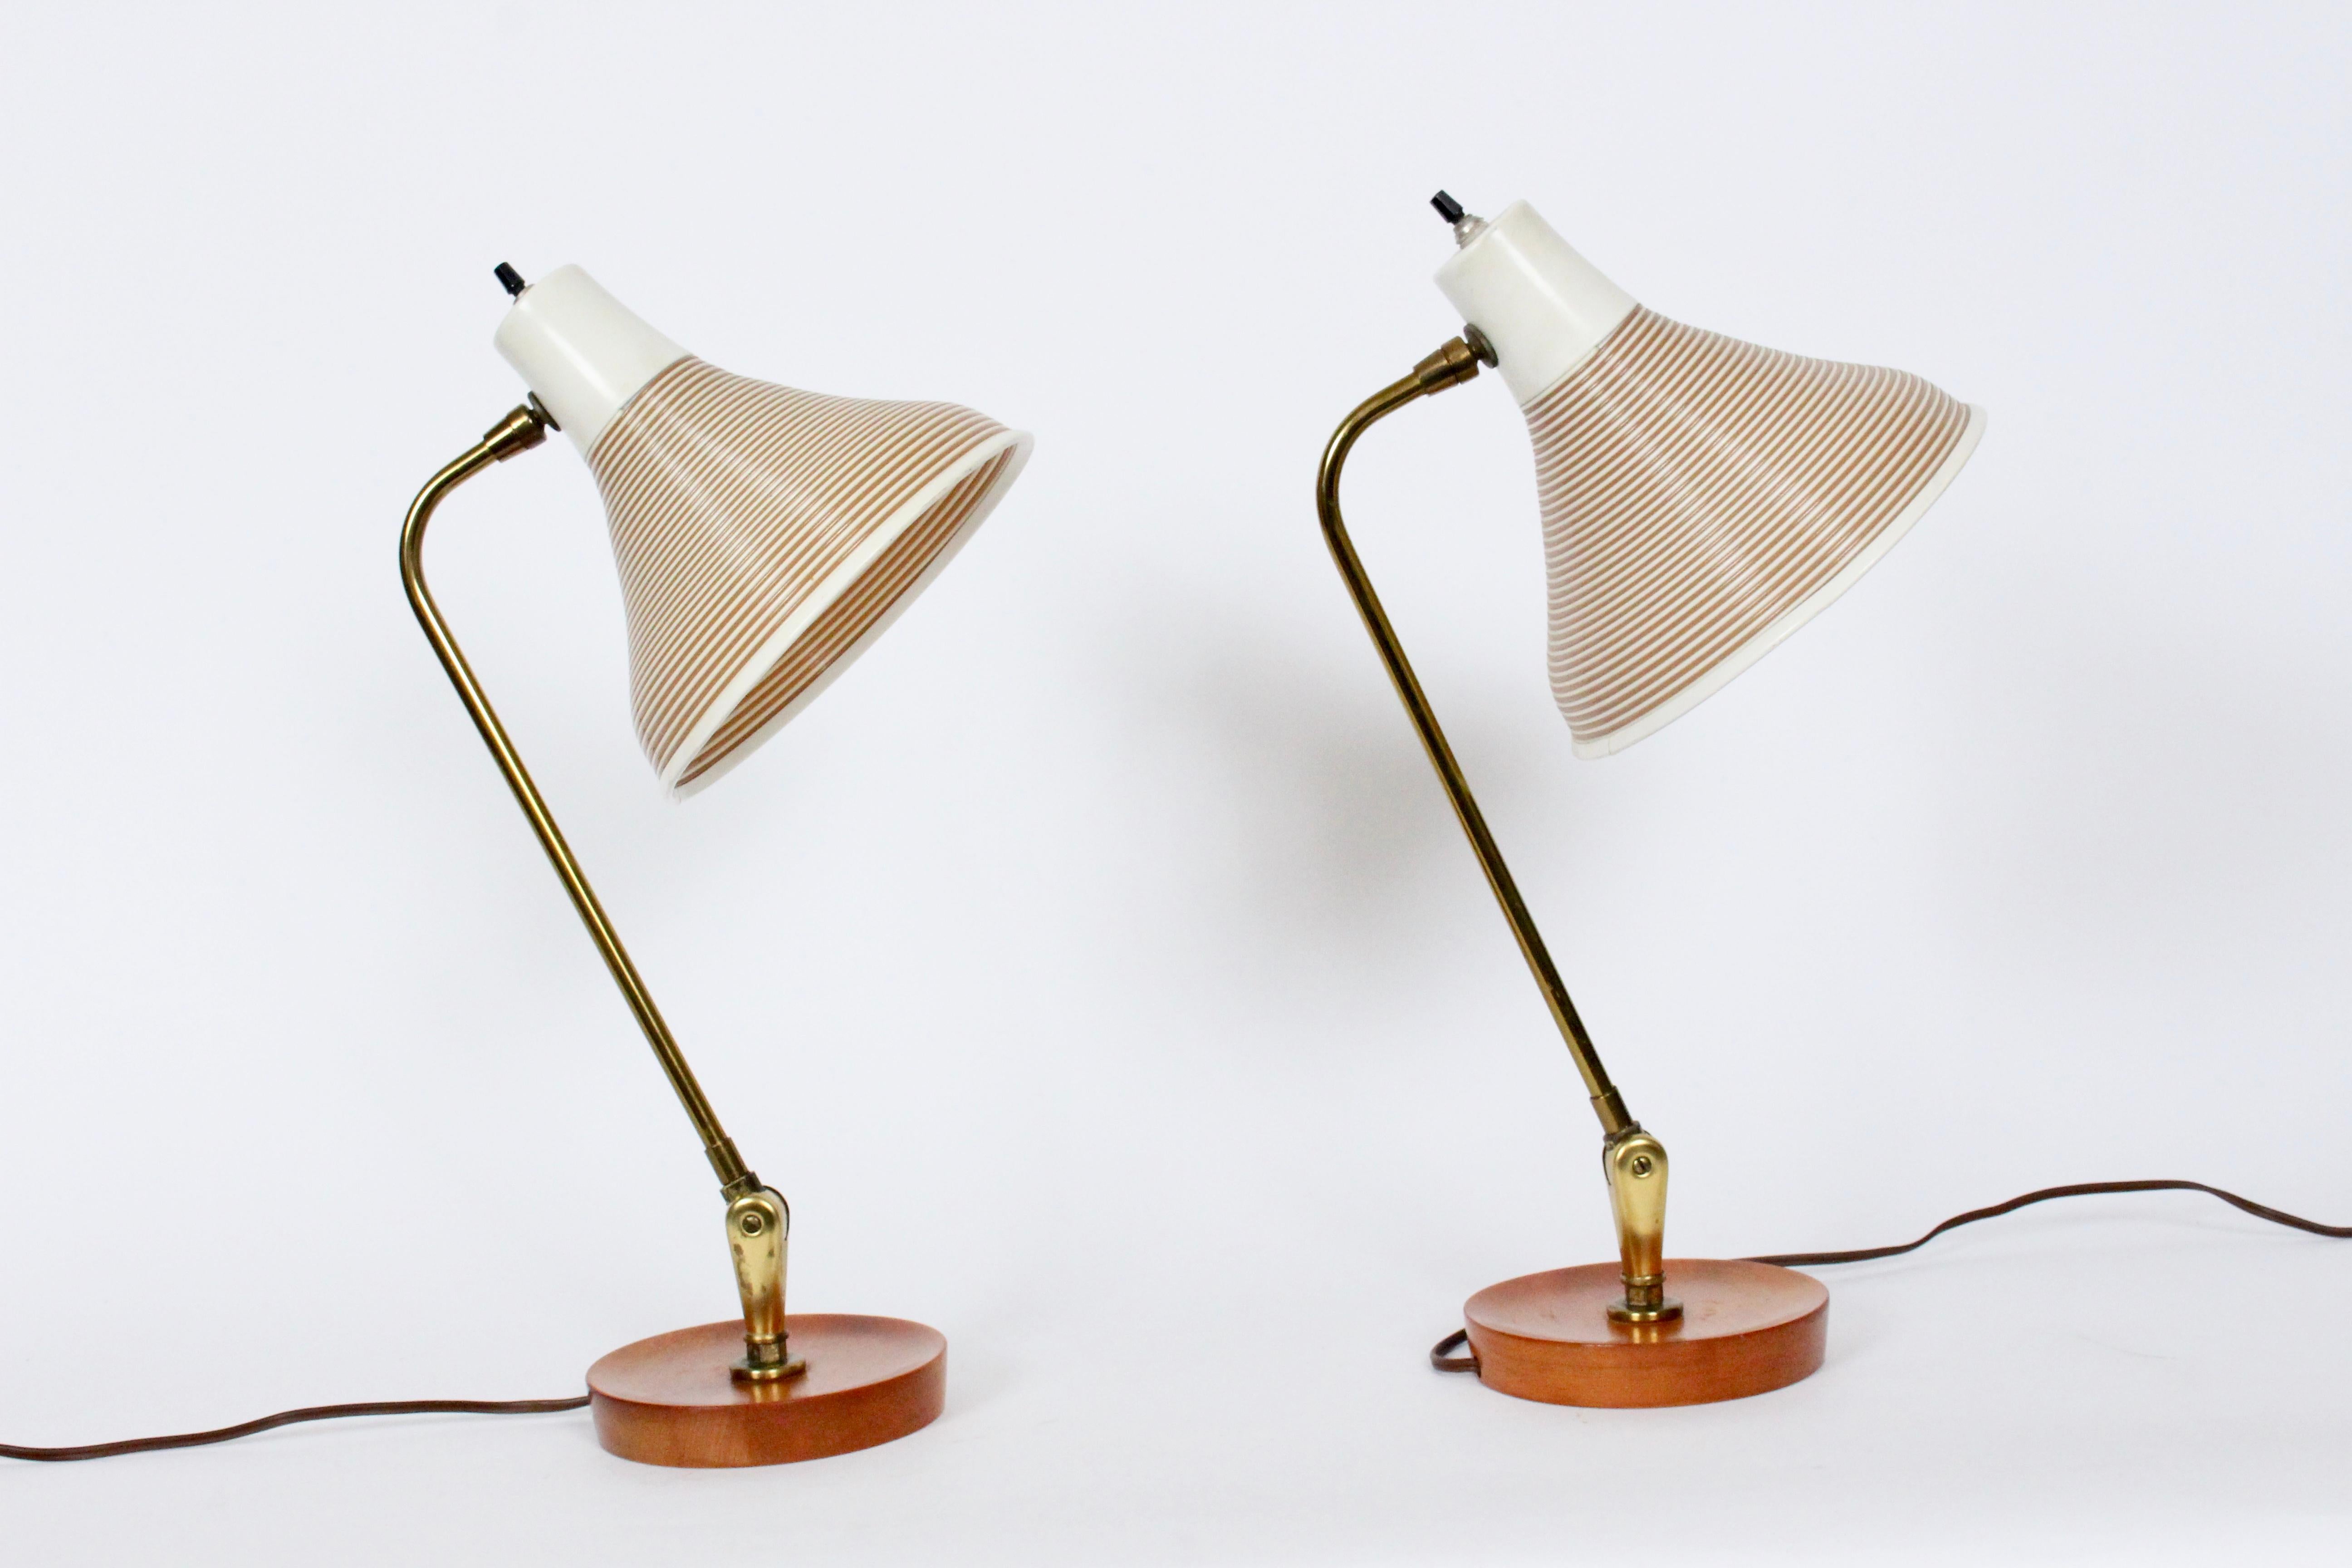 Pair of American Mid-Century Modern adjustable Heifetz Rotaflex Desk Lamps. Featuring original articulating Brass stems, vented Taupe and Off White coiled Rotaflex Bell shades on round, turned Maple, concave candlestick bases and great for holding